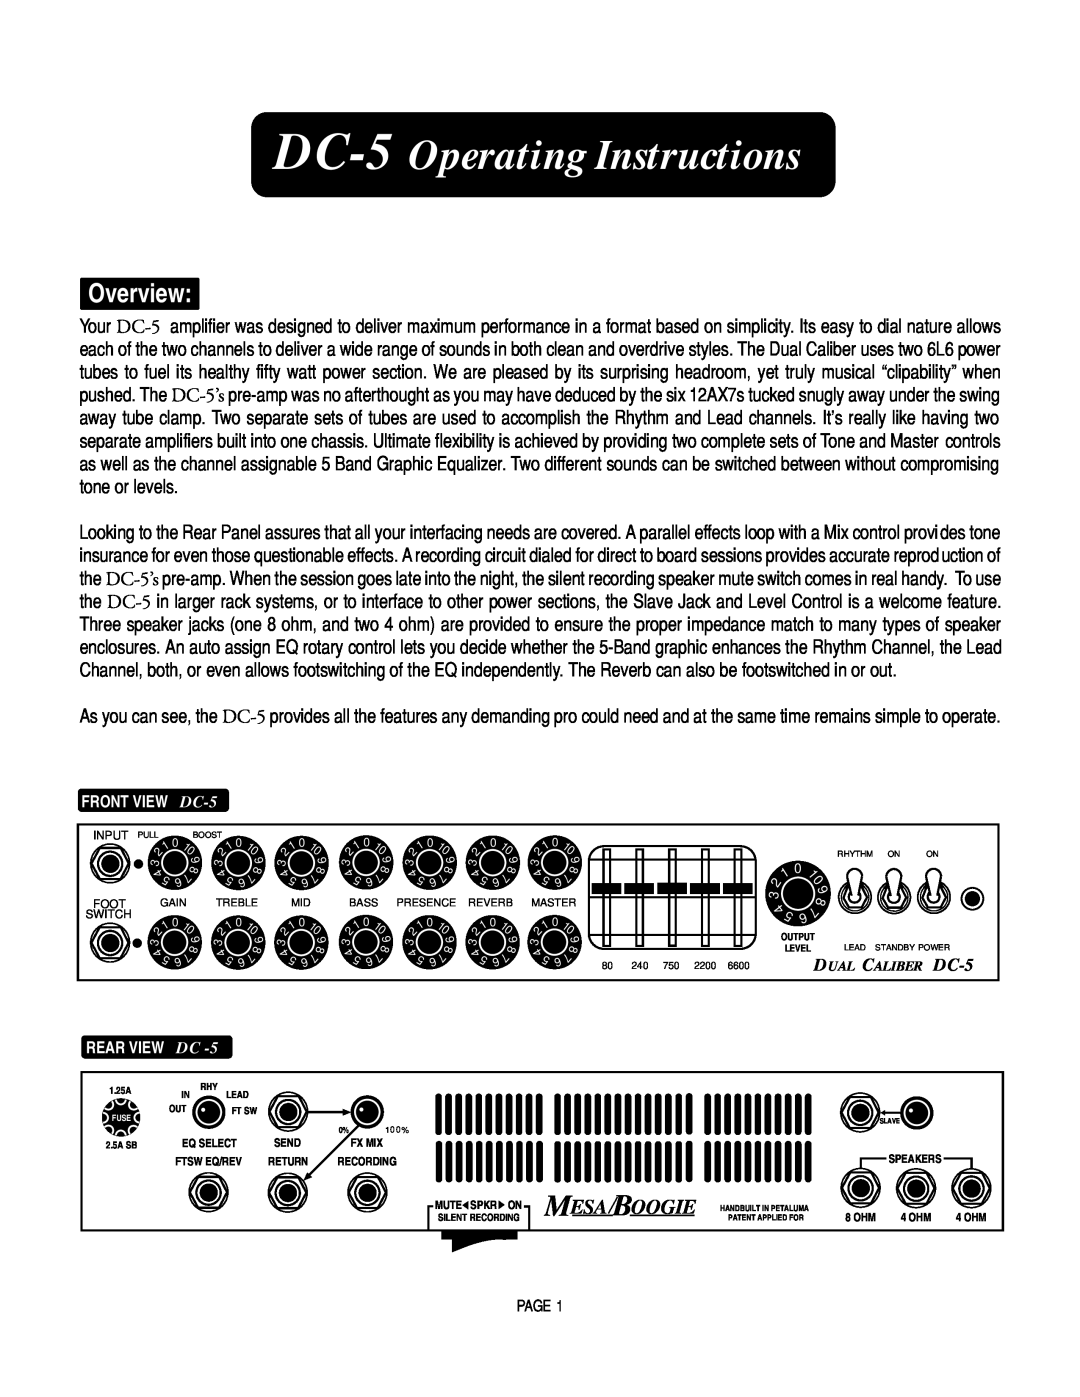 Mesa/Boogie DC5 manual Overview, DC-5 Operating Instructions 